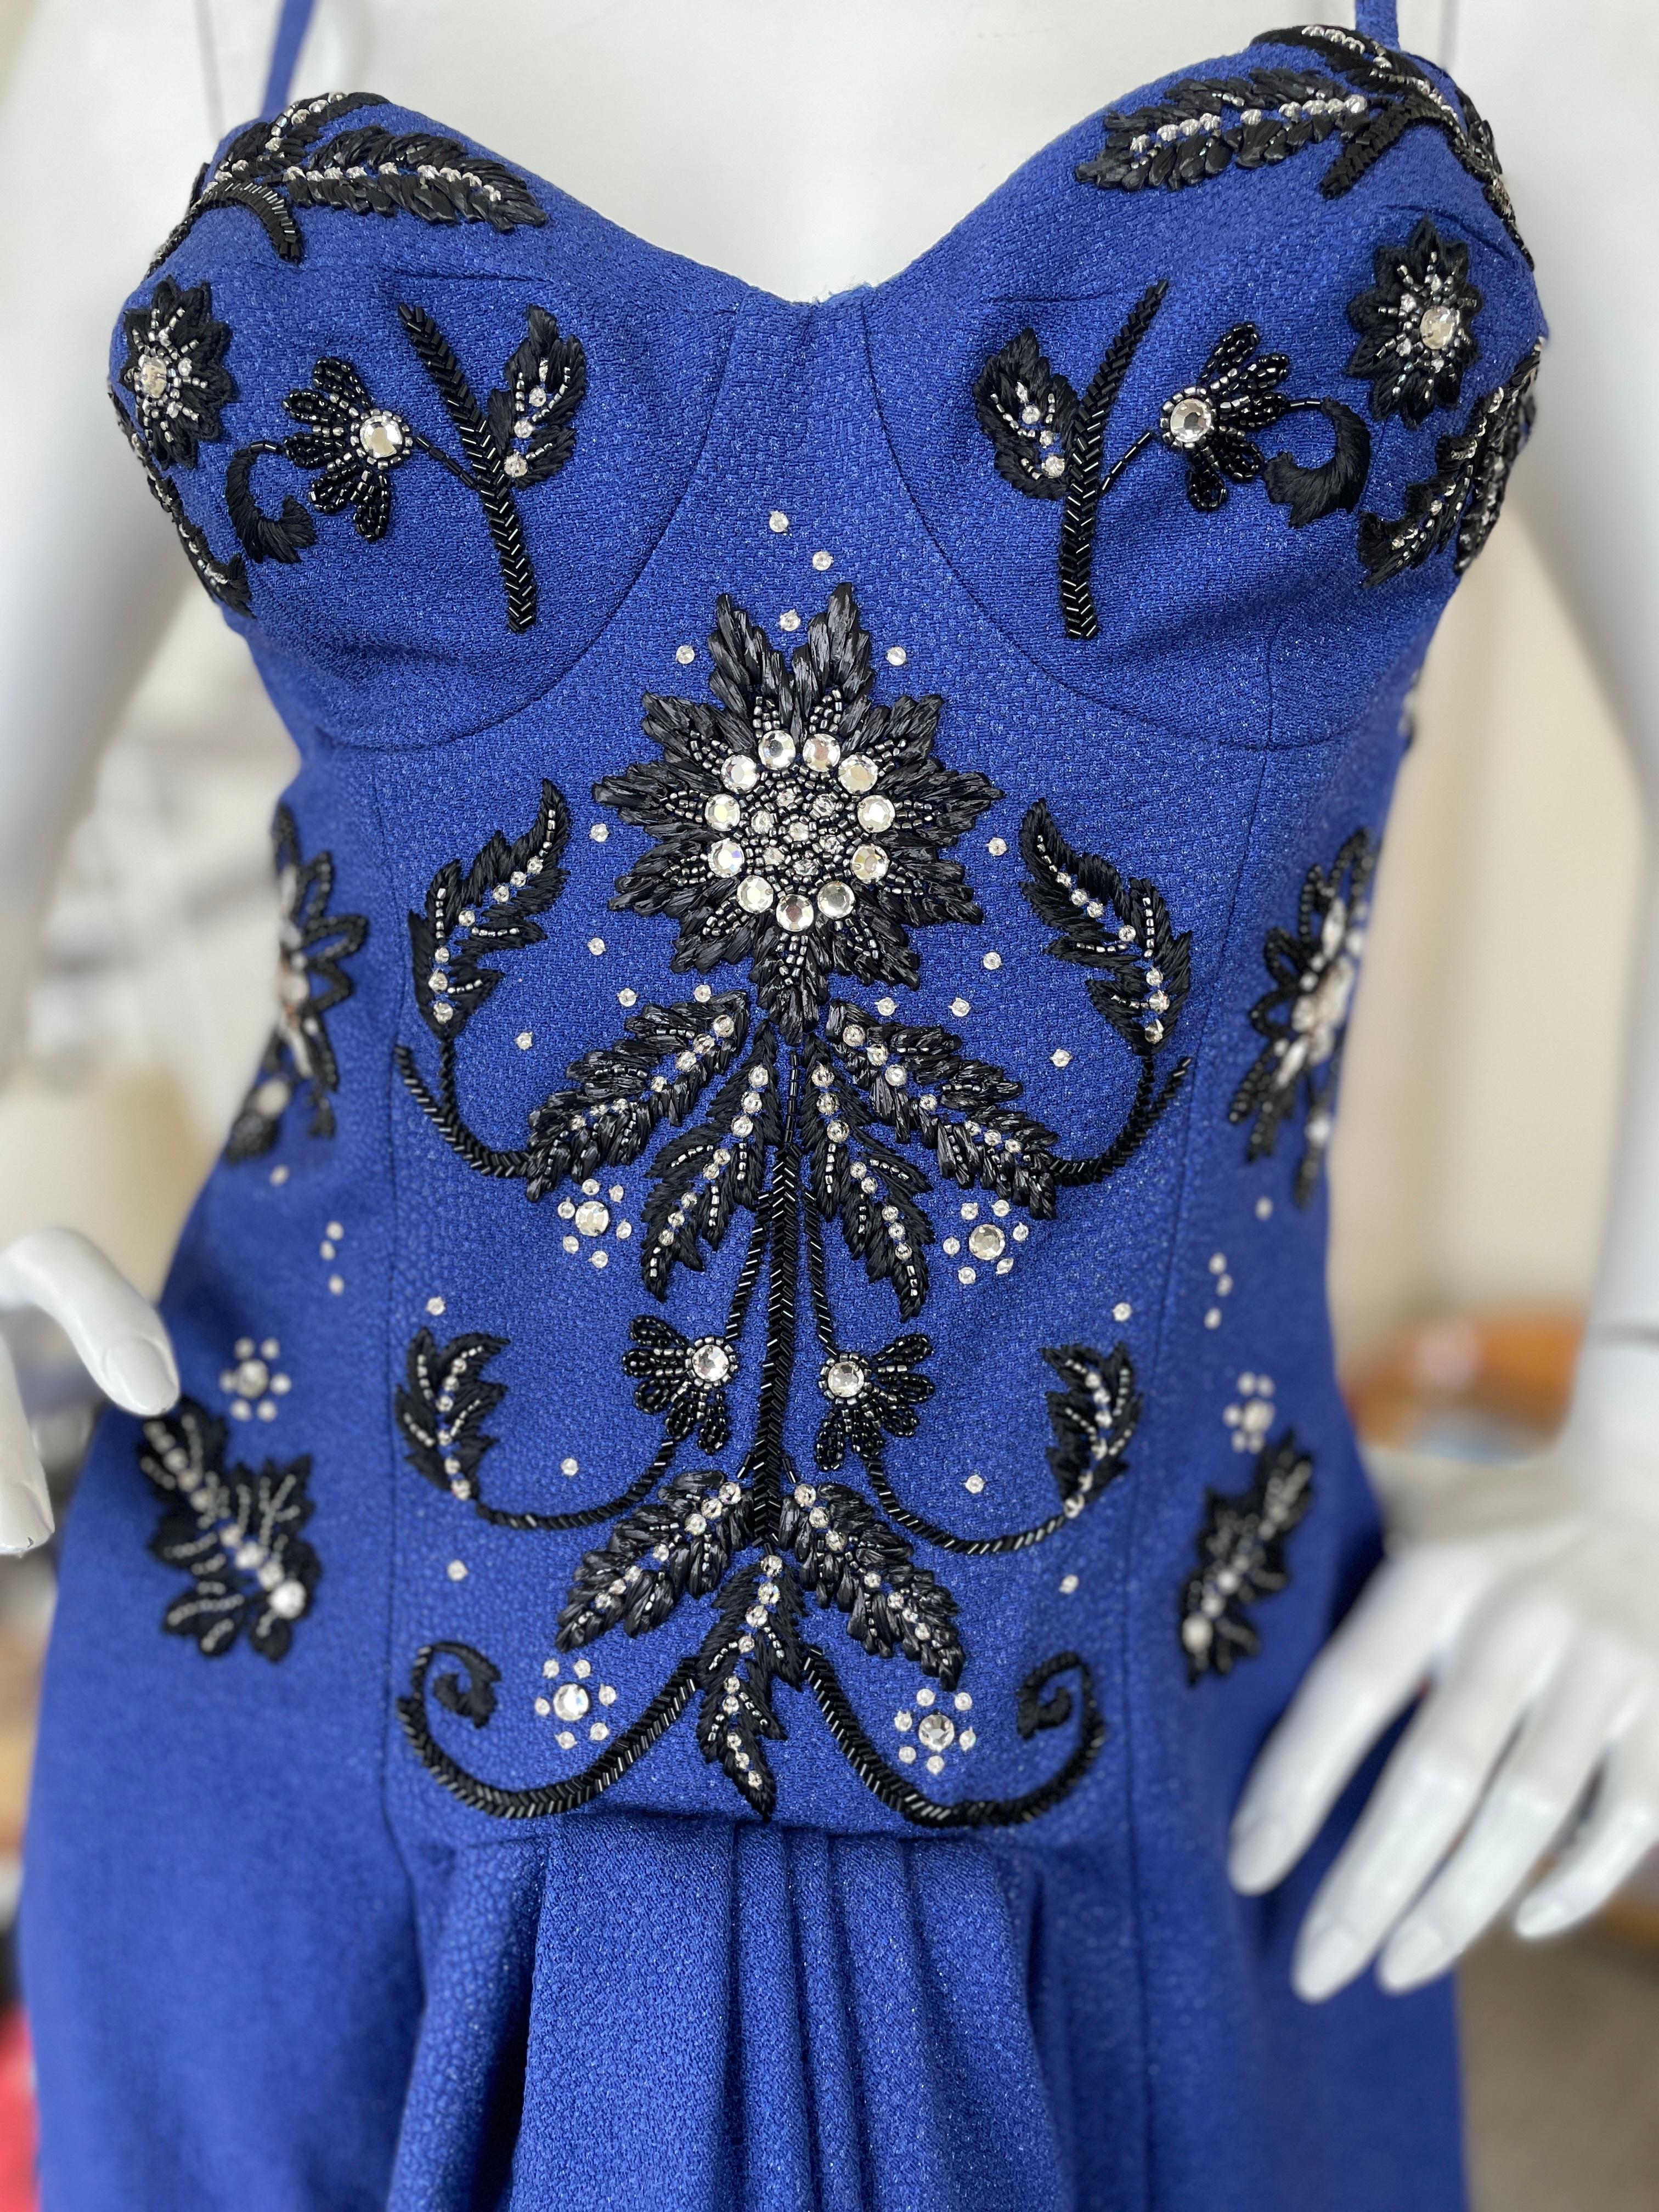 Christian Dior by John Galliano Fall 2007 Blue Dress with Crystal Details For Sale 7